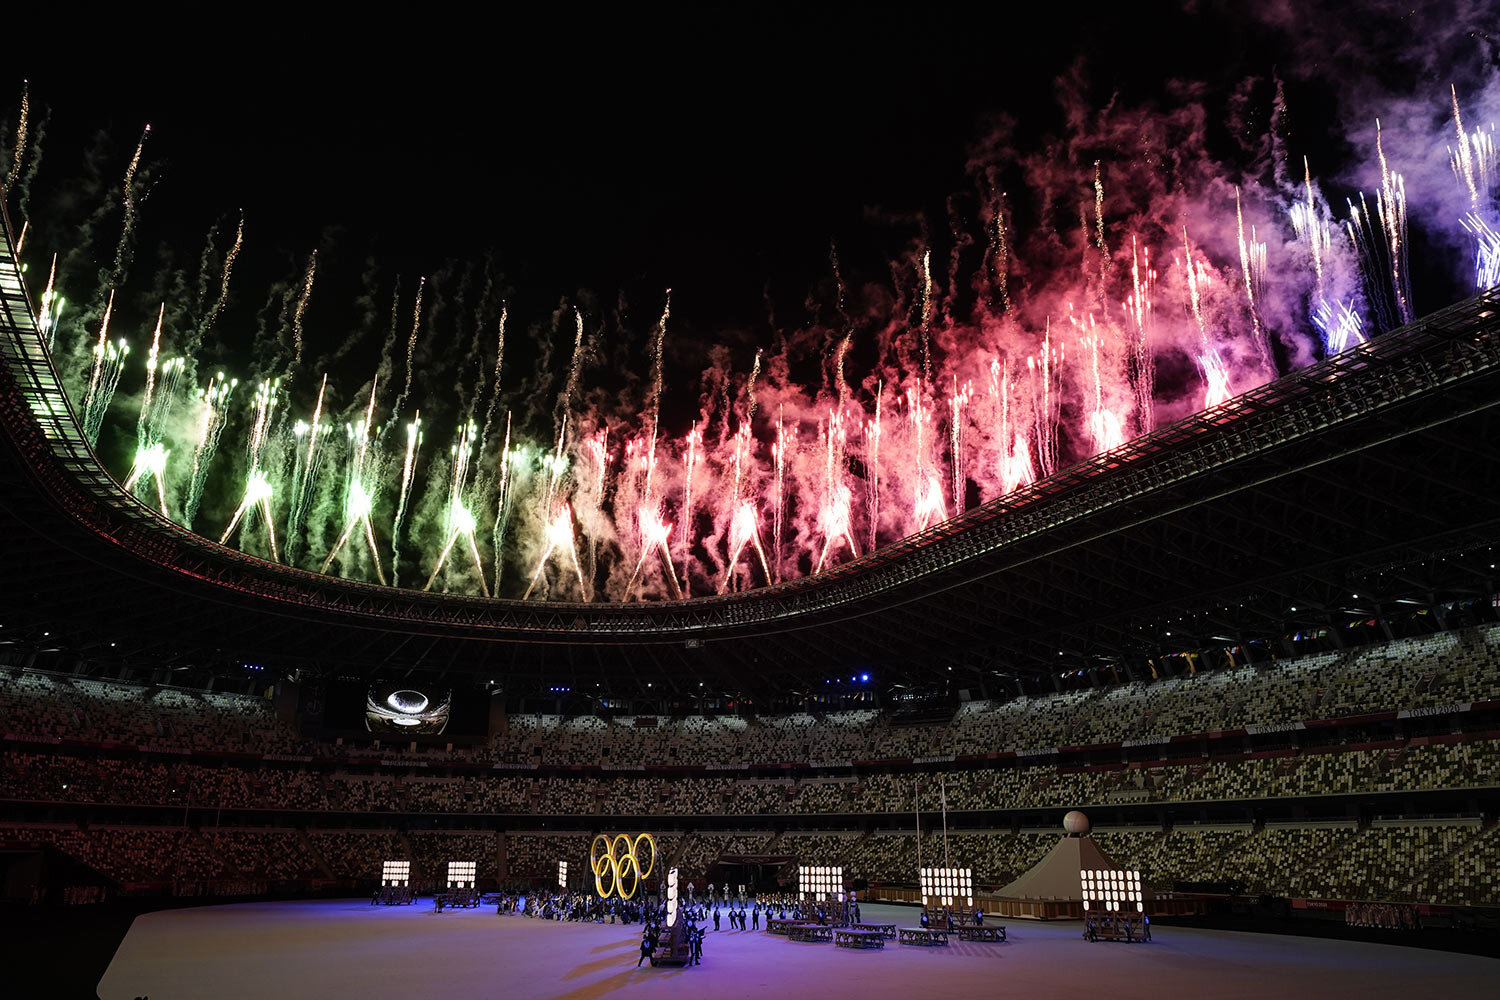  Fireworks explode from the roof of the stadium as the Olympic rings are assembled during the opening ceremony in the Olympic Stadium at the 2020 Summer Olympics, Friday, July 23, 2021, in Tokyo, Japan. (AP Photo/Ashley Landis) 